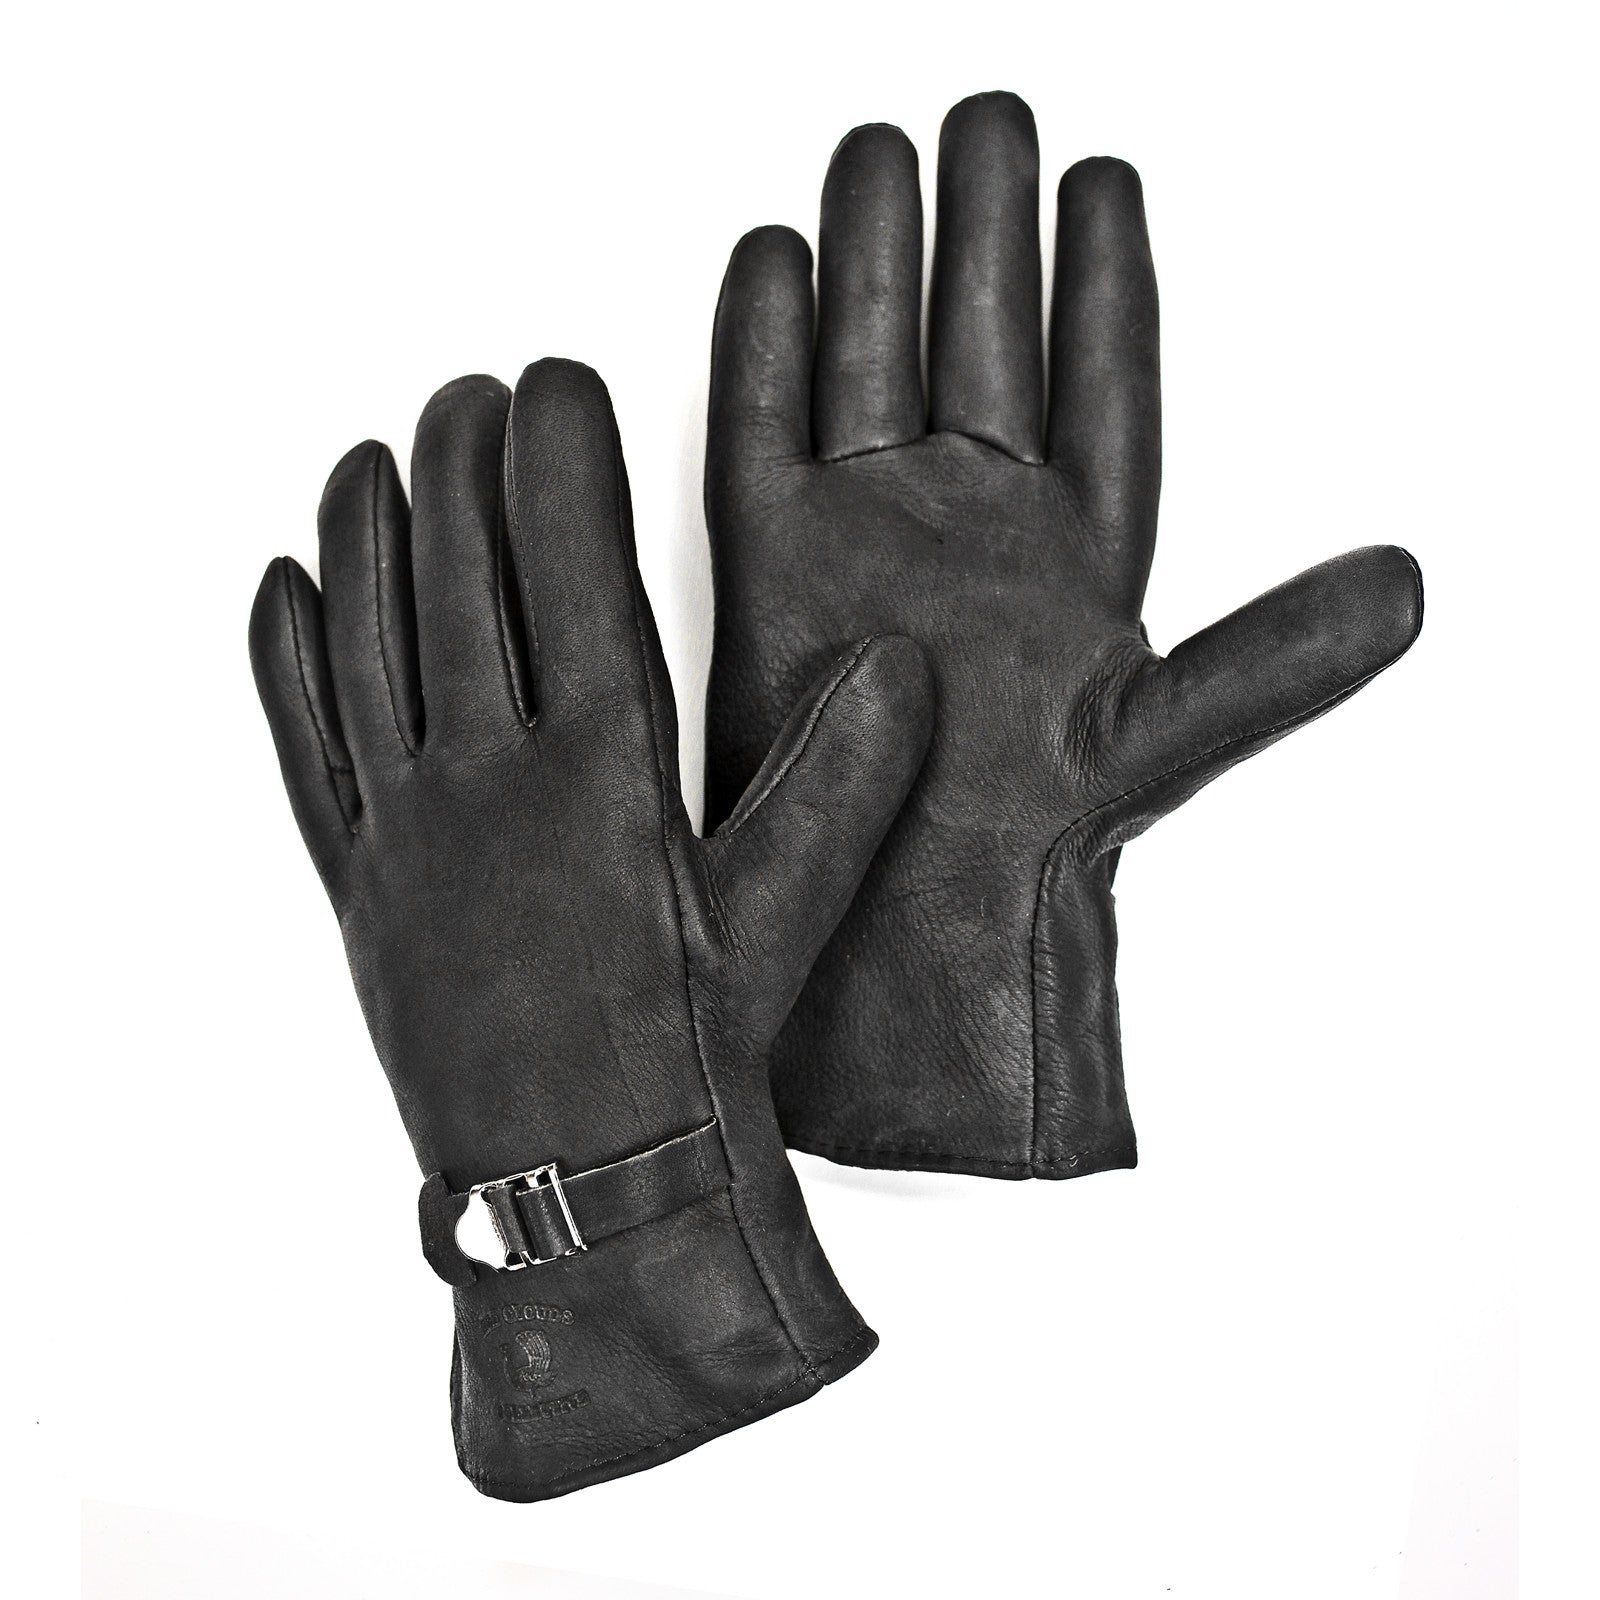 leather glove, made in usa glove, black leather glove, geier glove, red clouds glove, moto glove, motorcycle gloves, thin leather gloves, driving glove